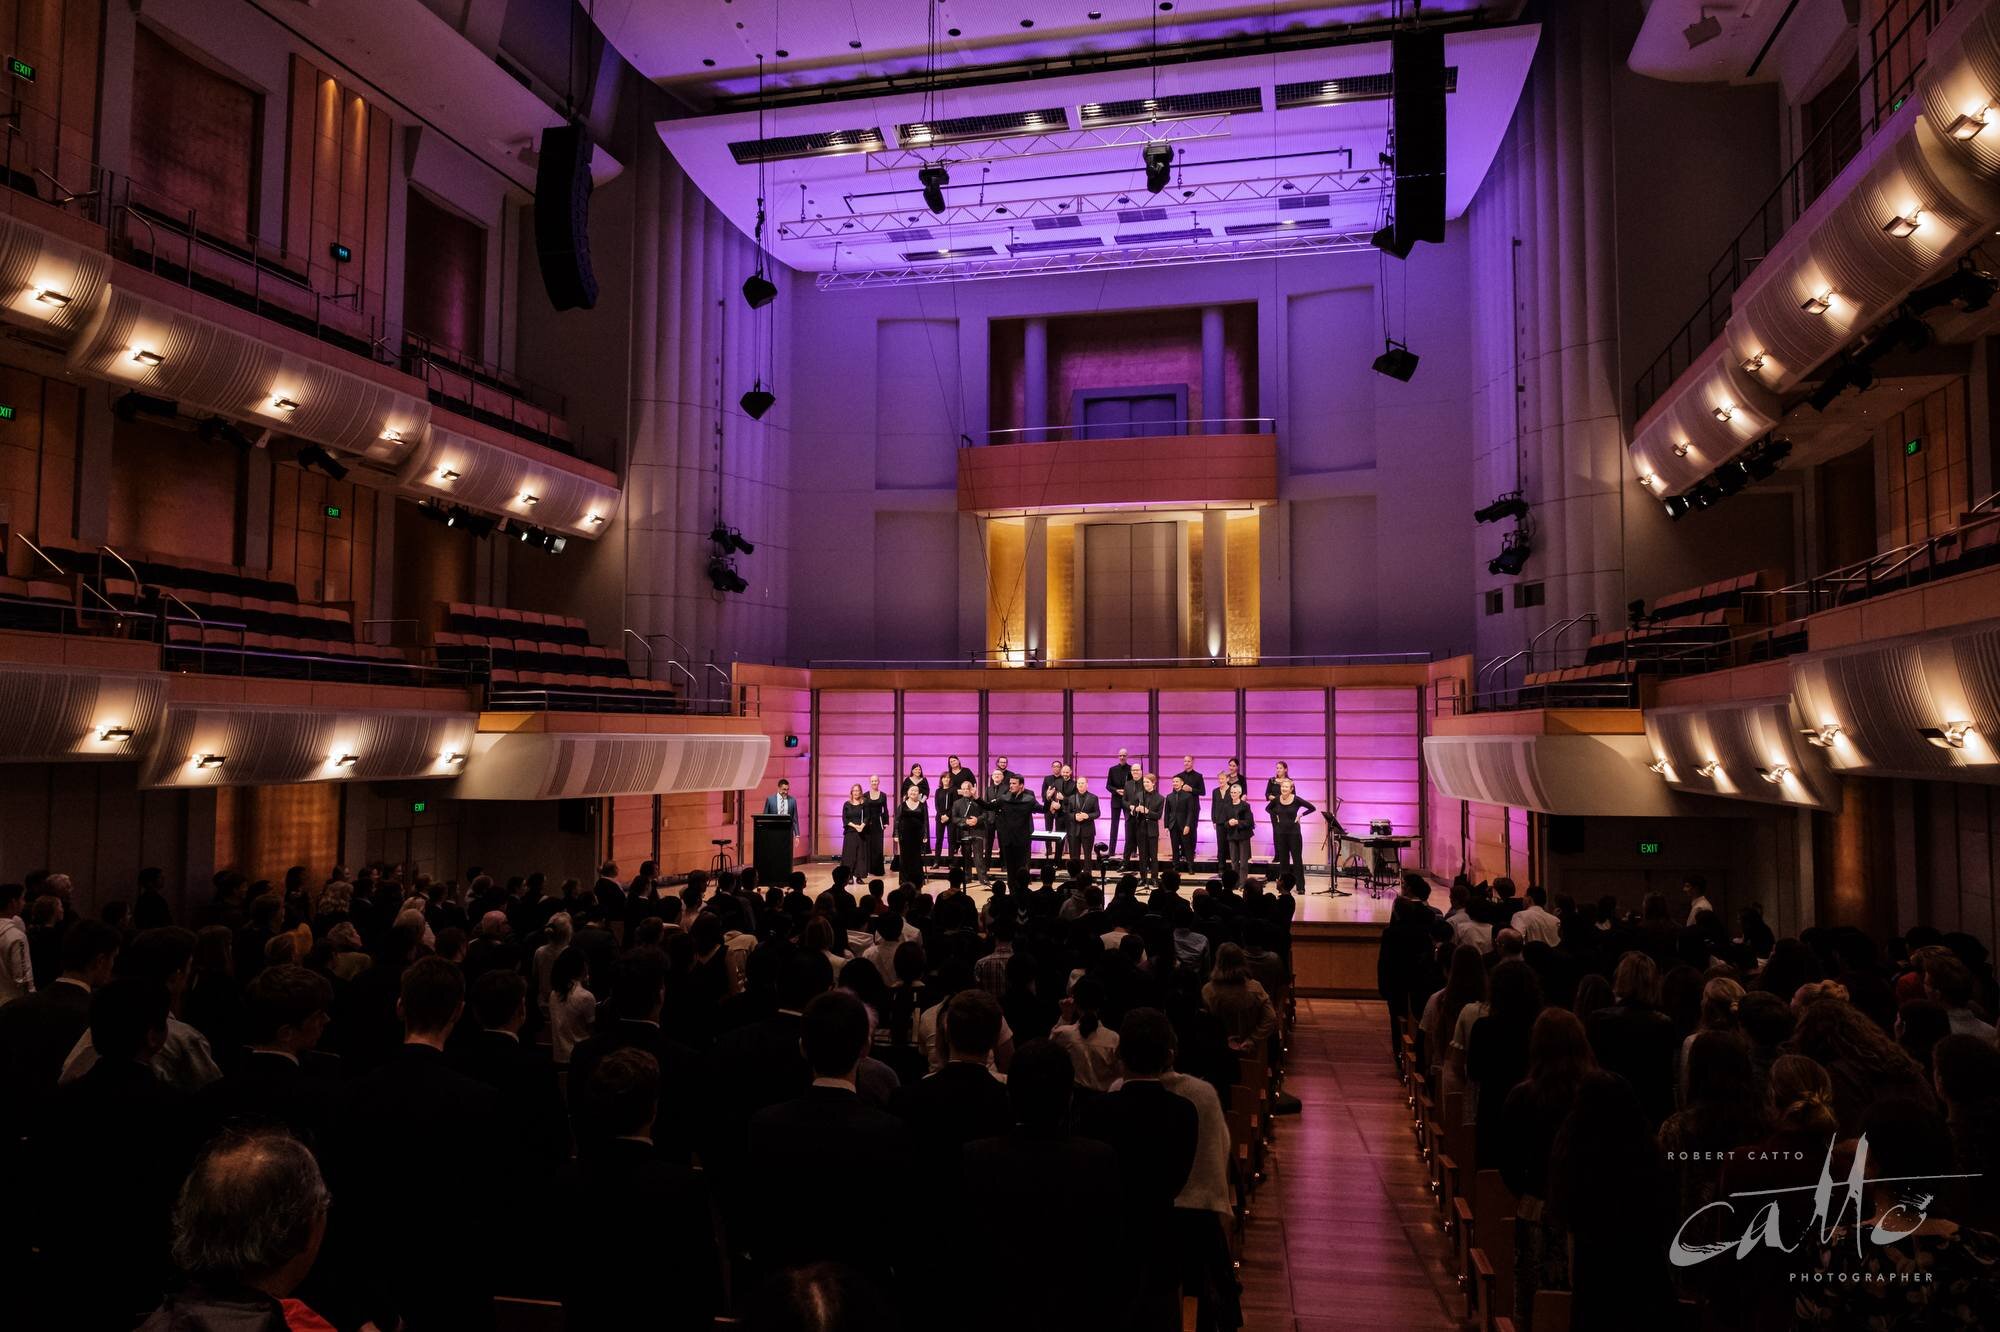  Sam Allchurch, conductor of the Sydney Chamber Choir, directing the audience to join in during the Australian Romantic &amp; Classical Orchestra's Voyage of Musical Discovery: Voices &amp; Instruments concert.  (Taken with a Fujifilm X-H1, 16mm lens